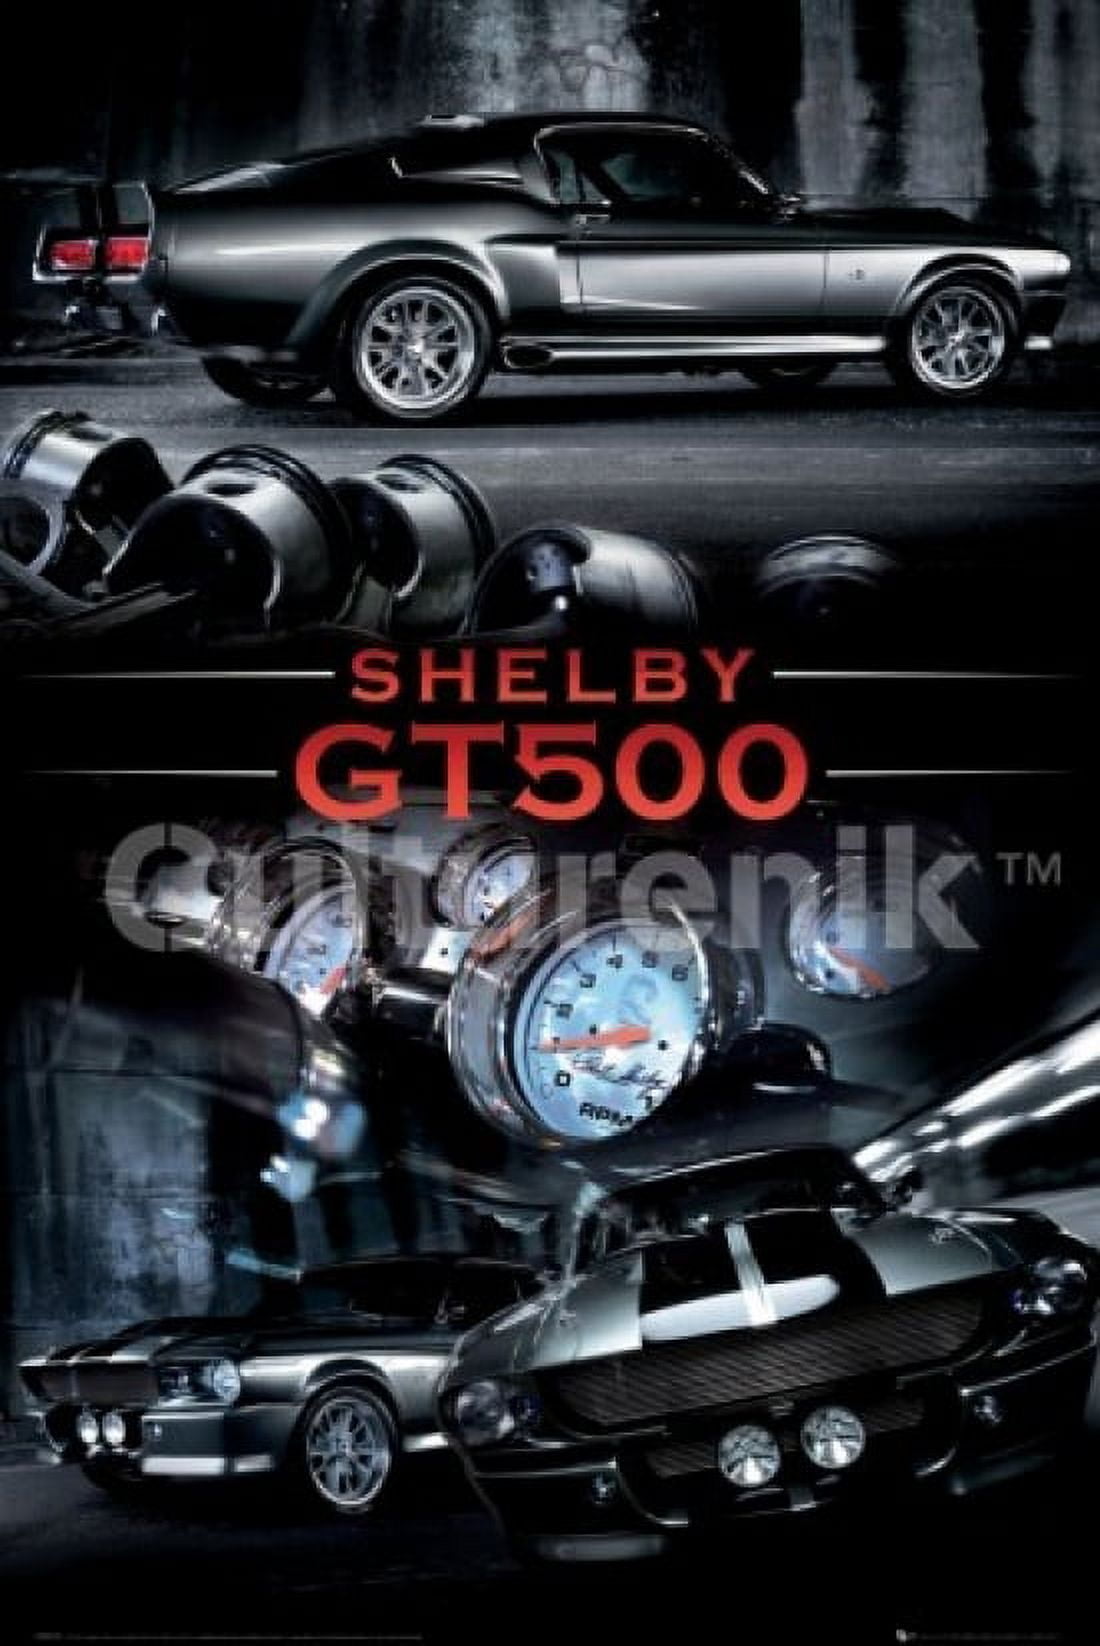 Ford - Mustang Shelby GT500 Poster (36 X 24)